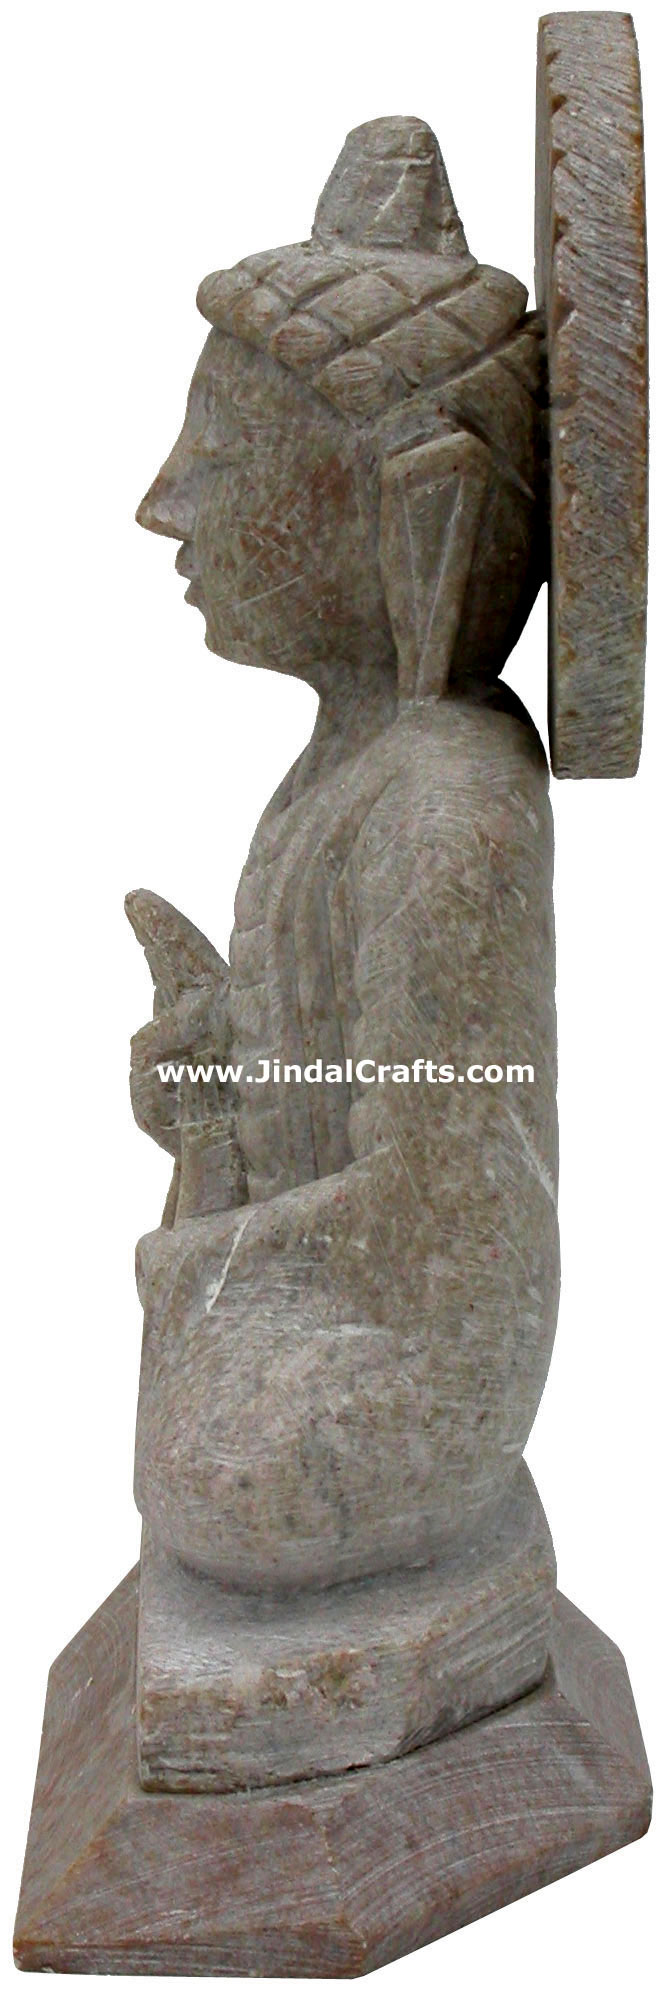 Lord Buddha Hand Carved Buddhisht Sculpture Stone Indian Artifacts Statues Idol